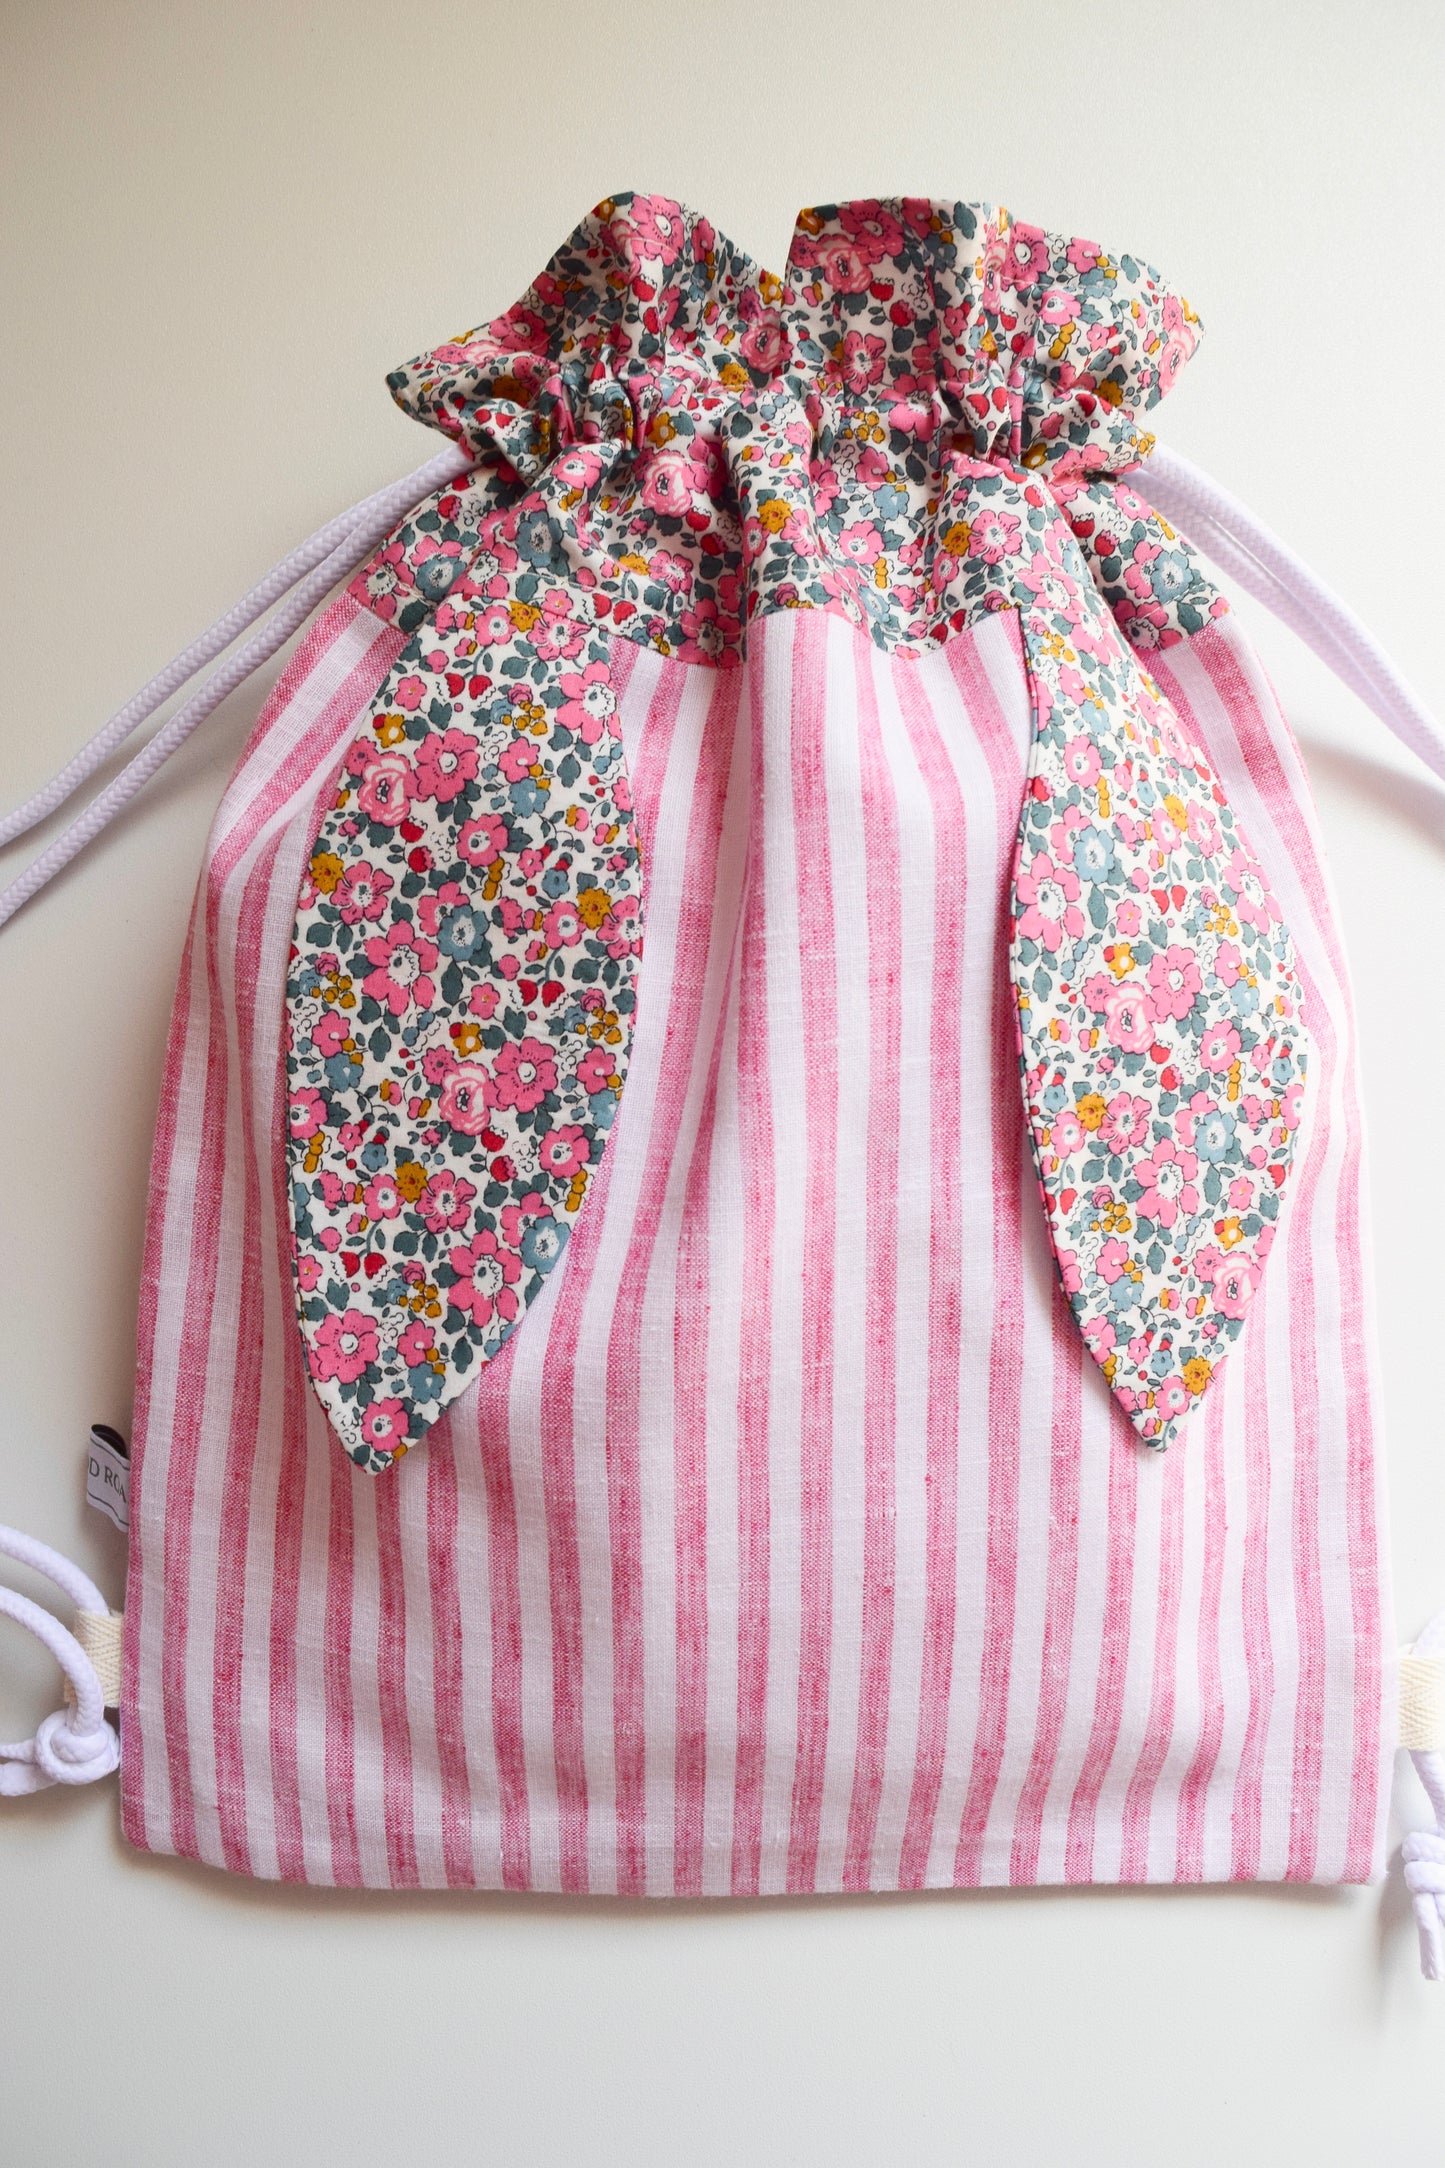 Liberty of London Bunny Backpack - 'Betsy Ann' & Wide Pink Stripe